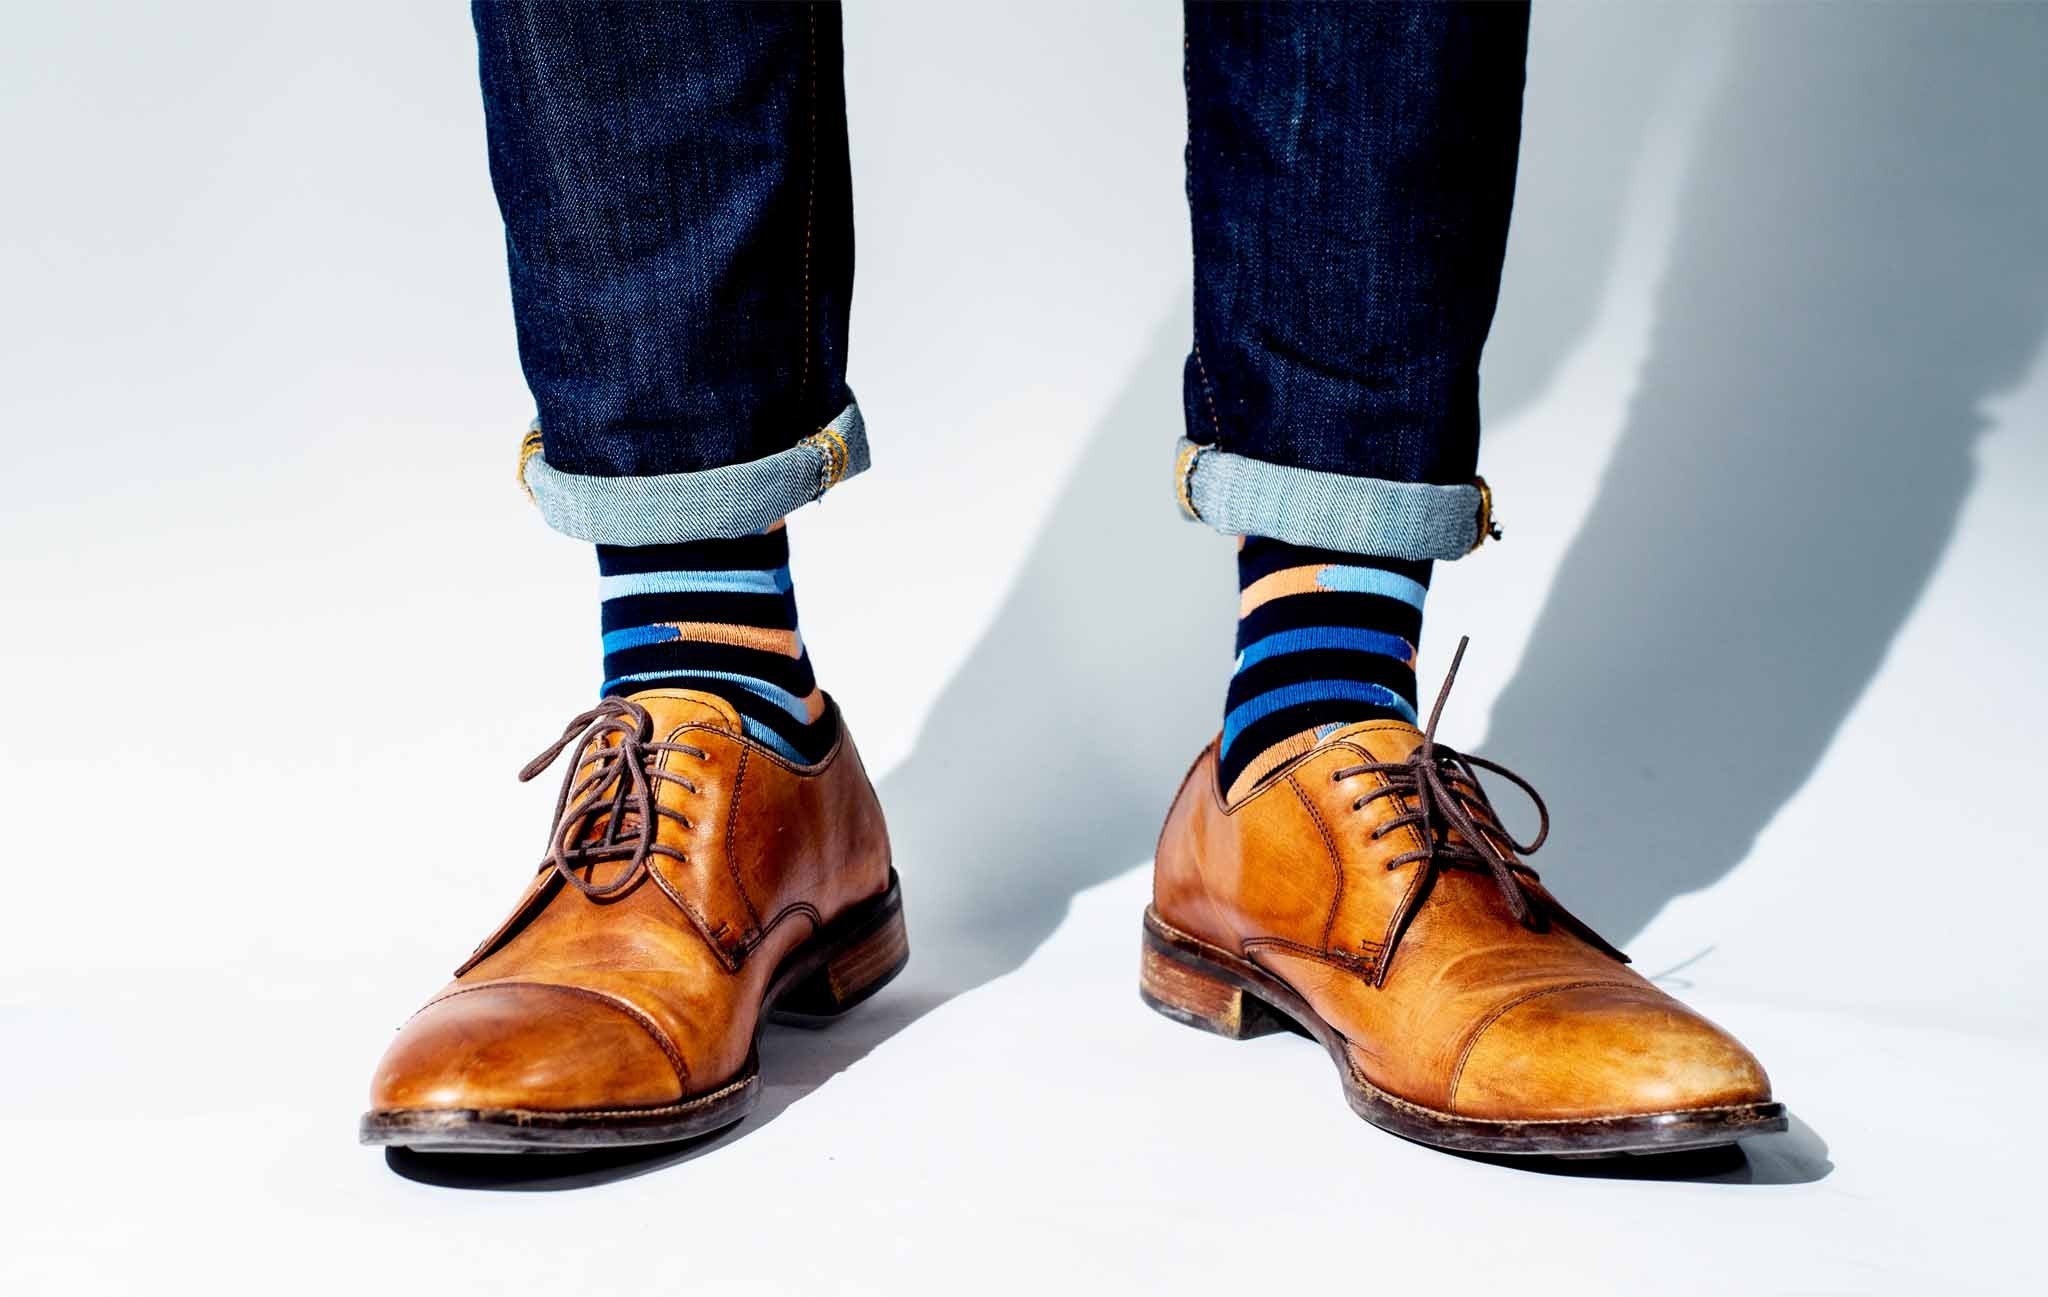 socks for oxford shoes